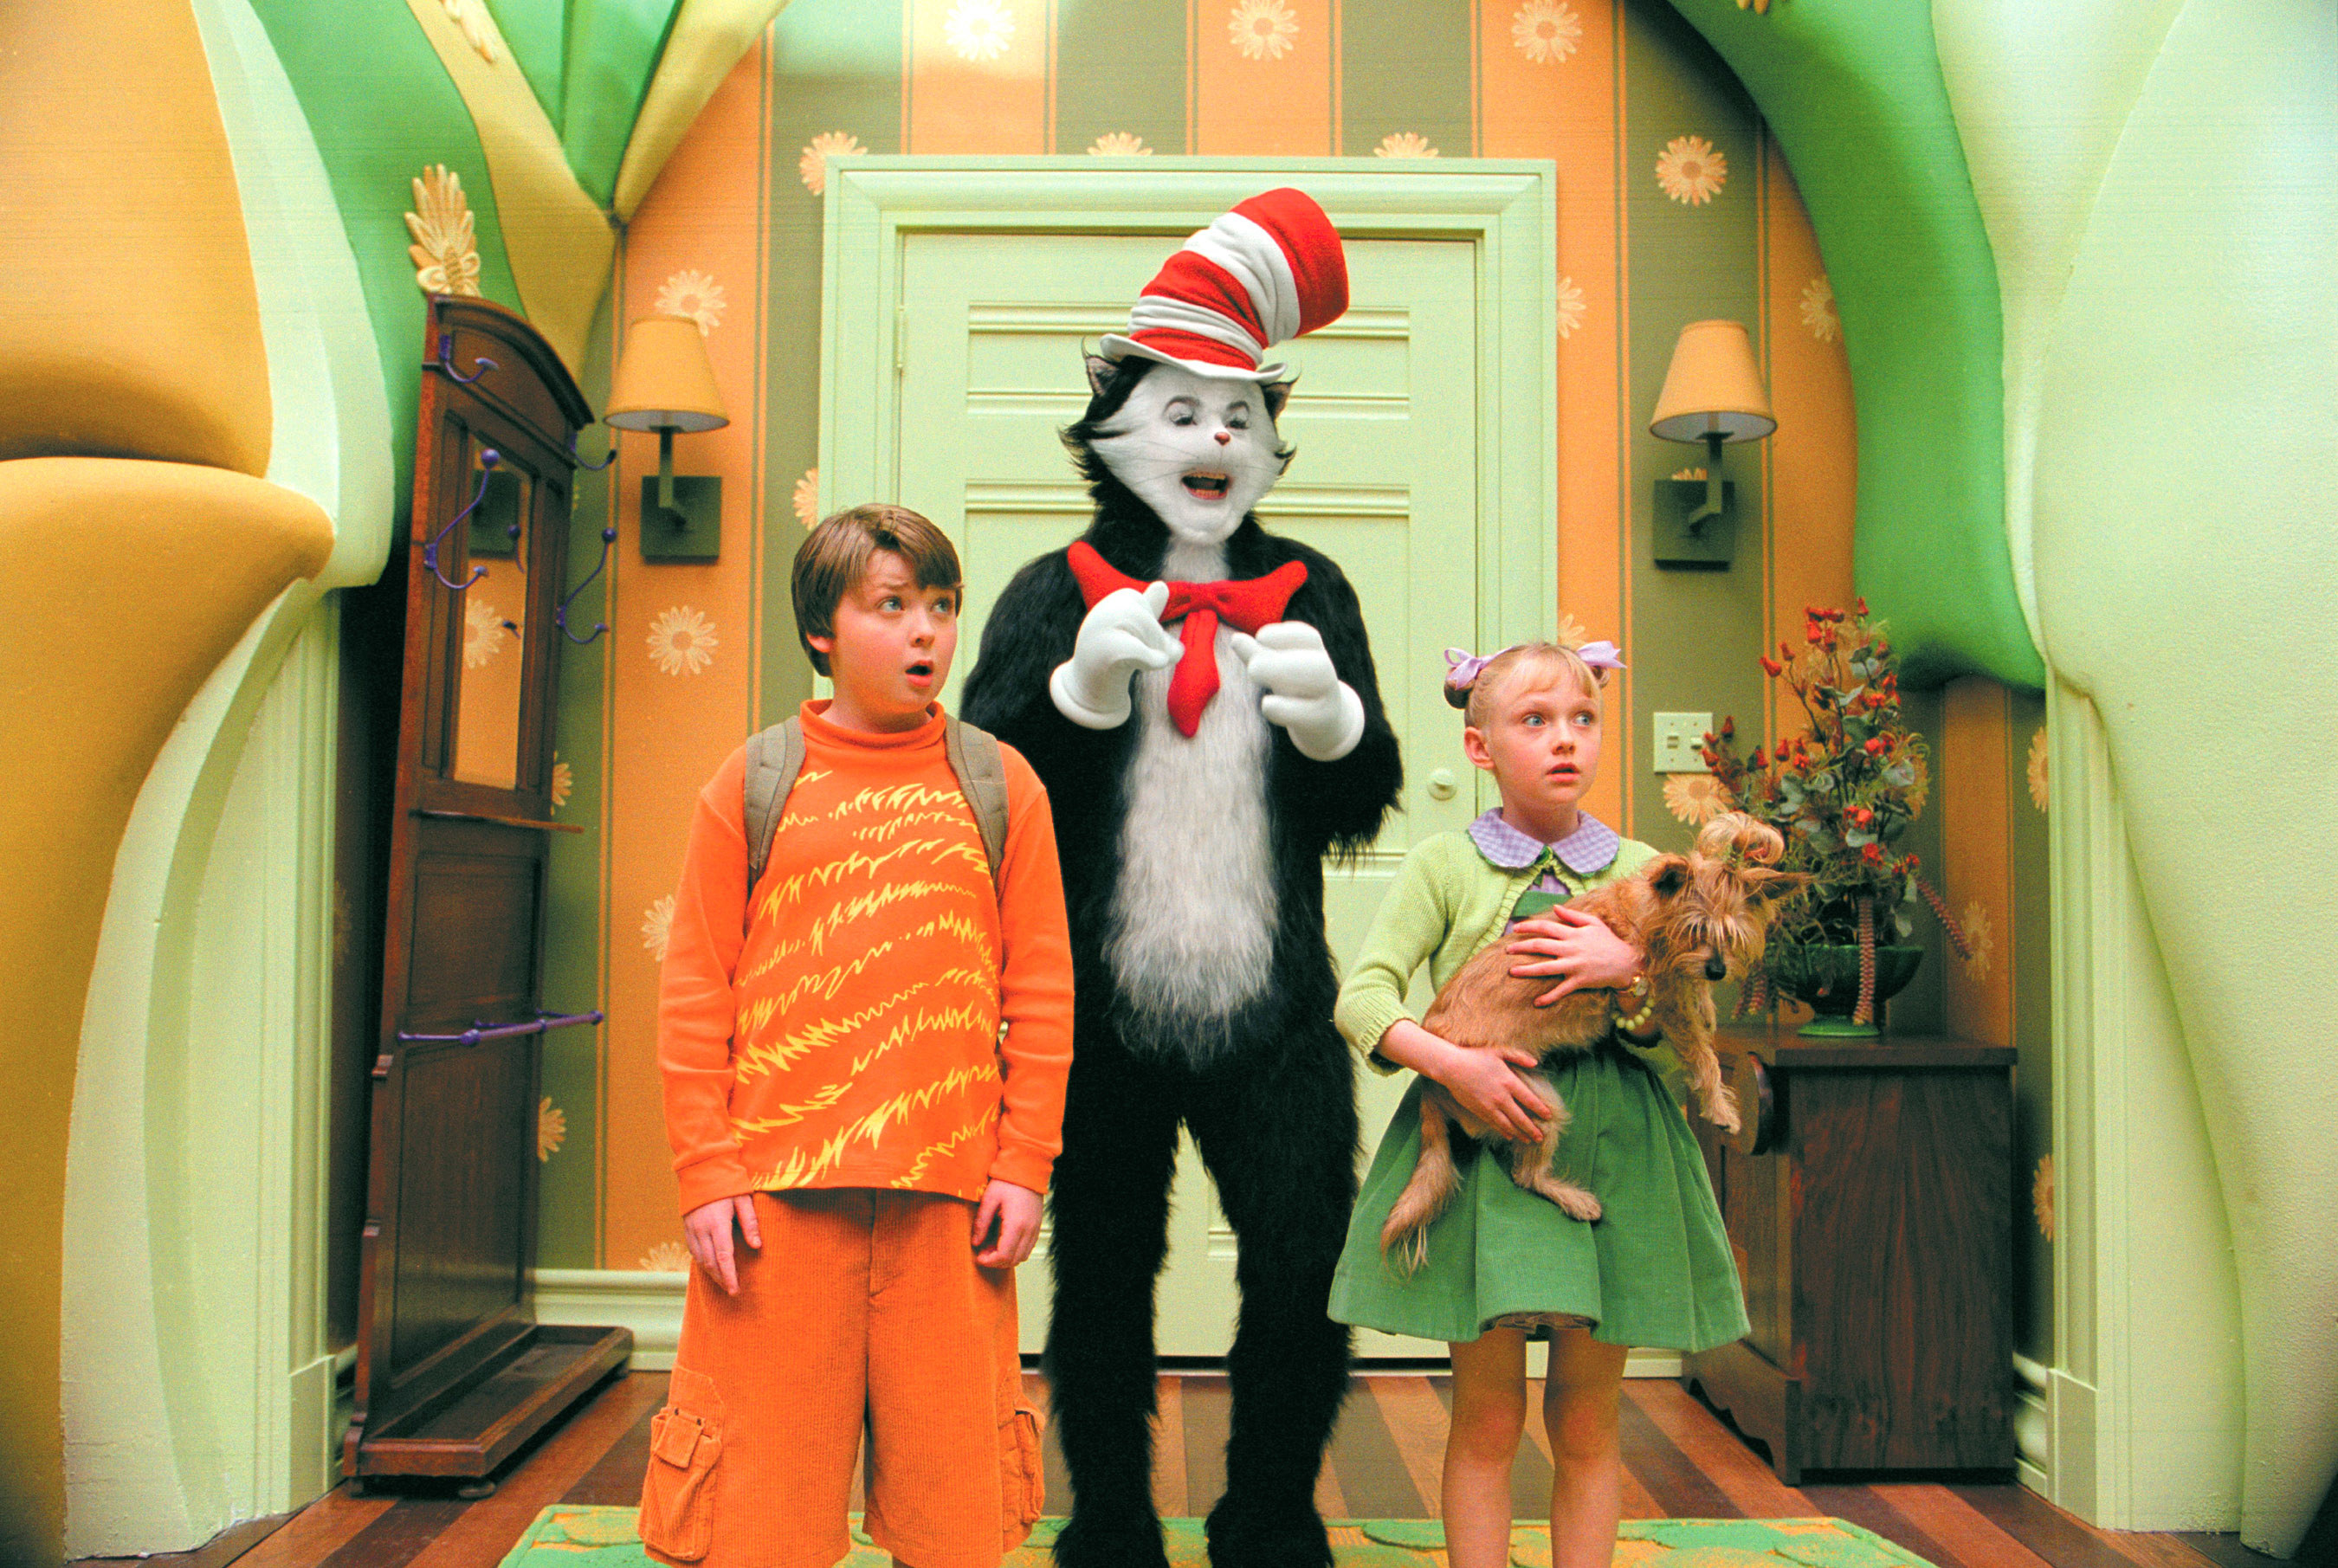 Mike Myers, Dakota Fanning, and Spencer Breslin in the Cat in the Hat